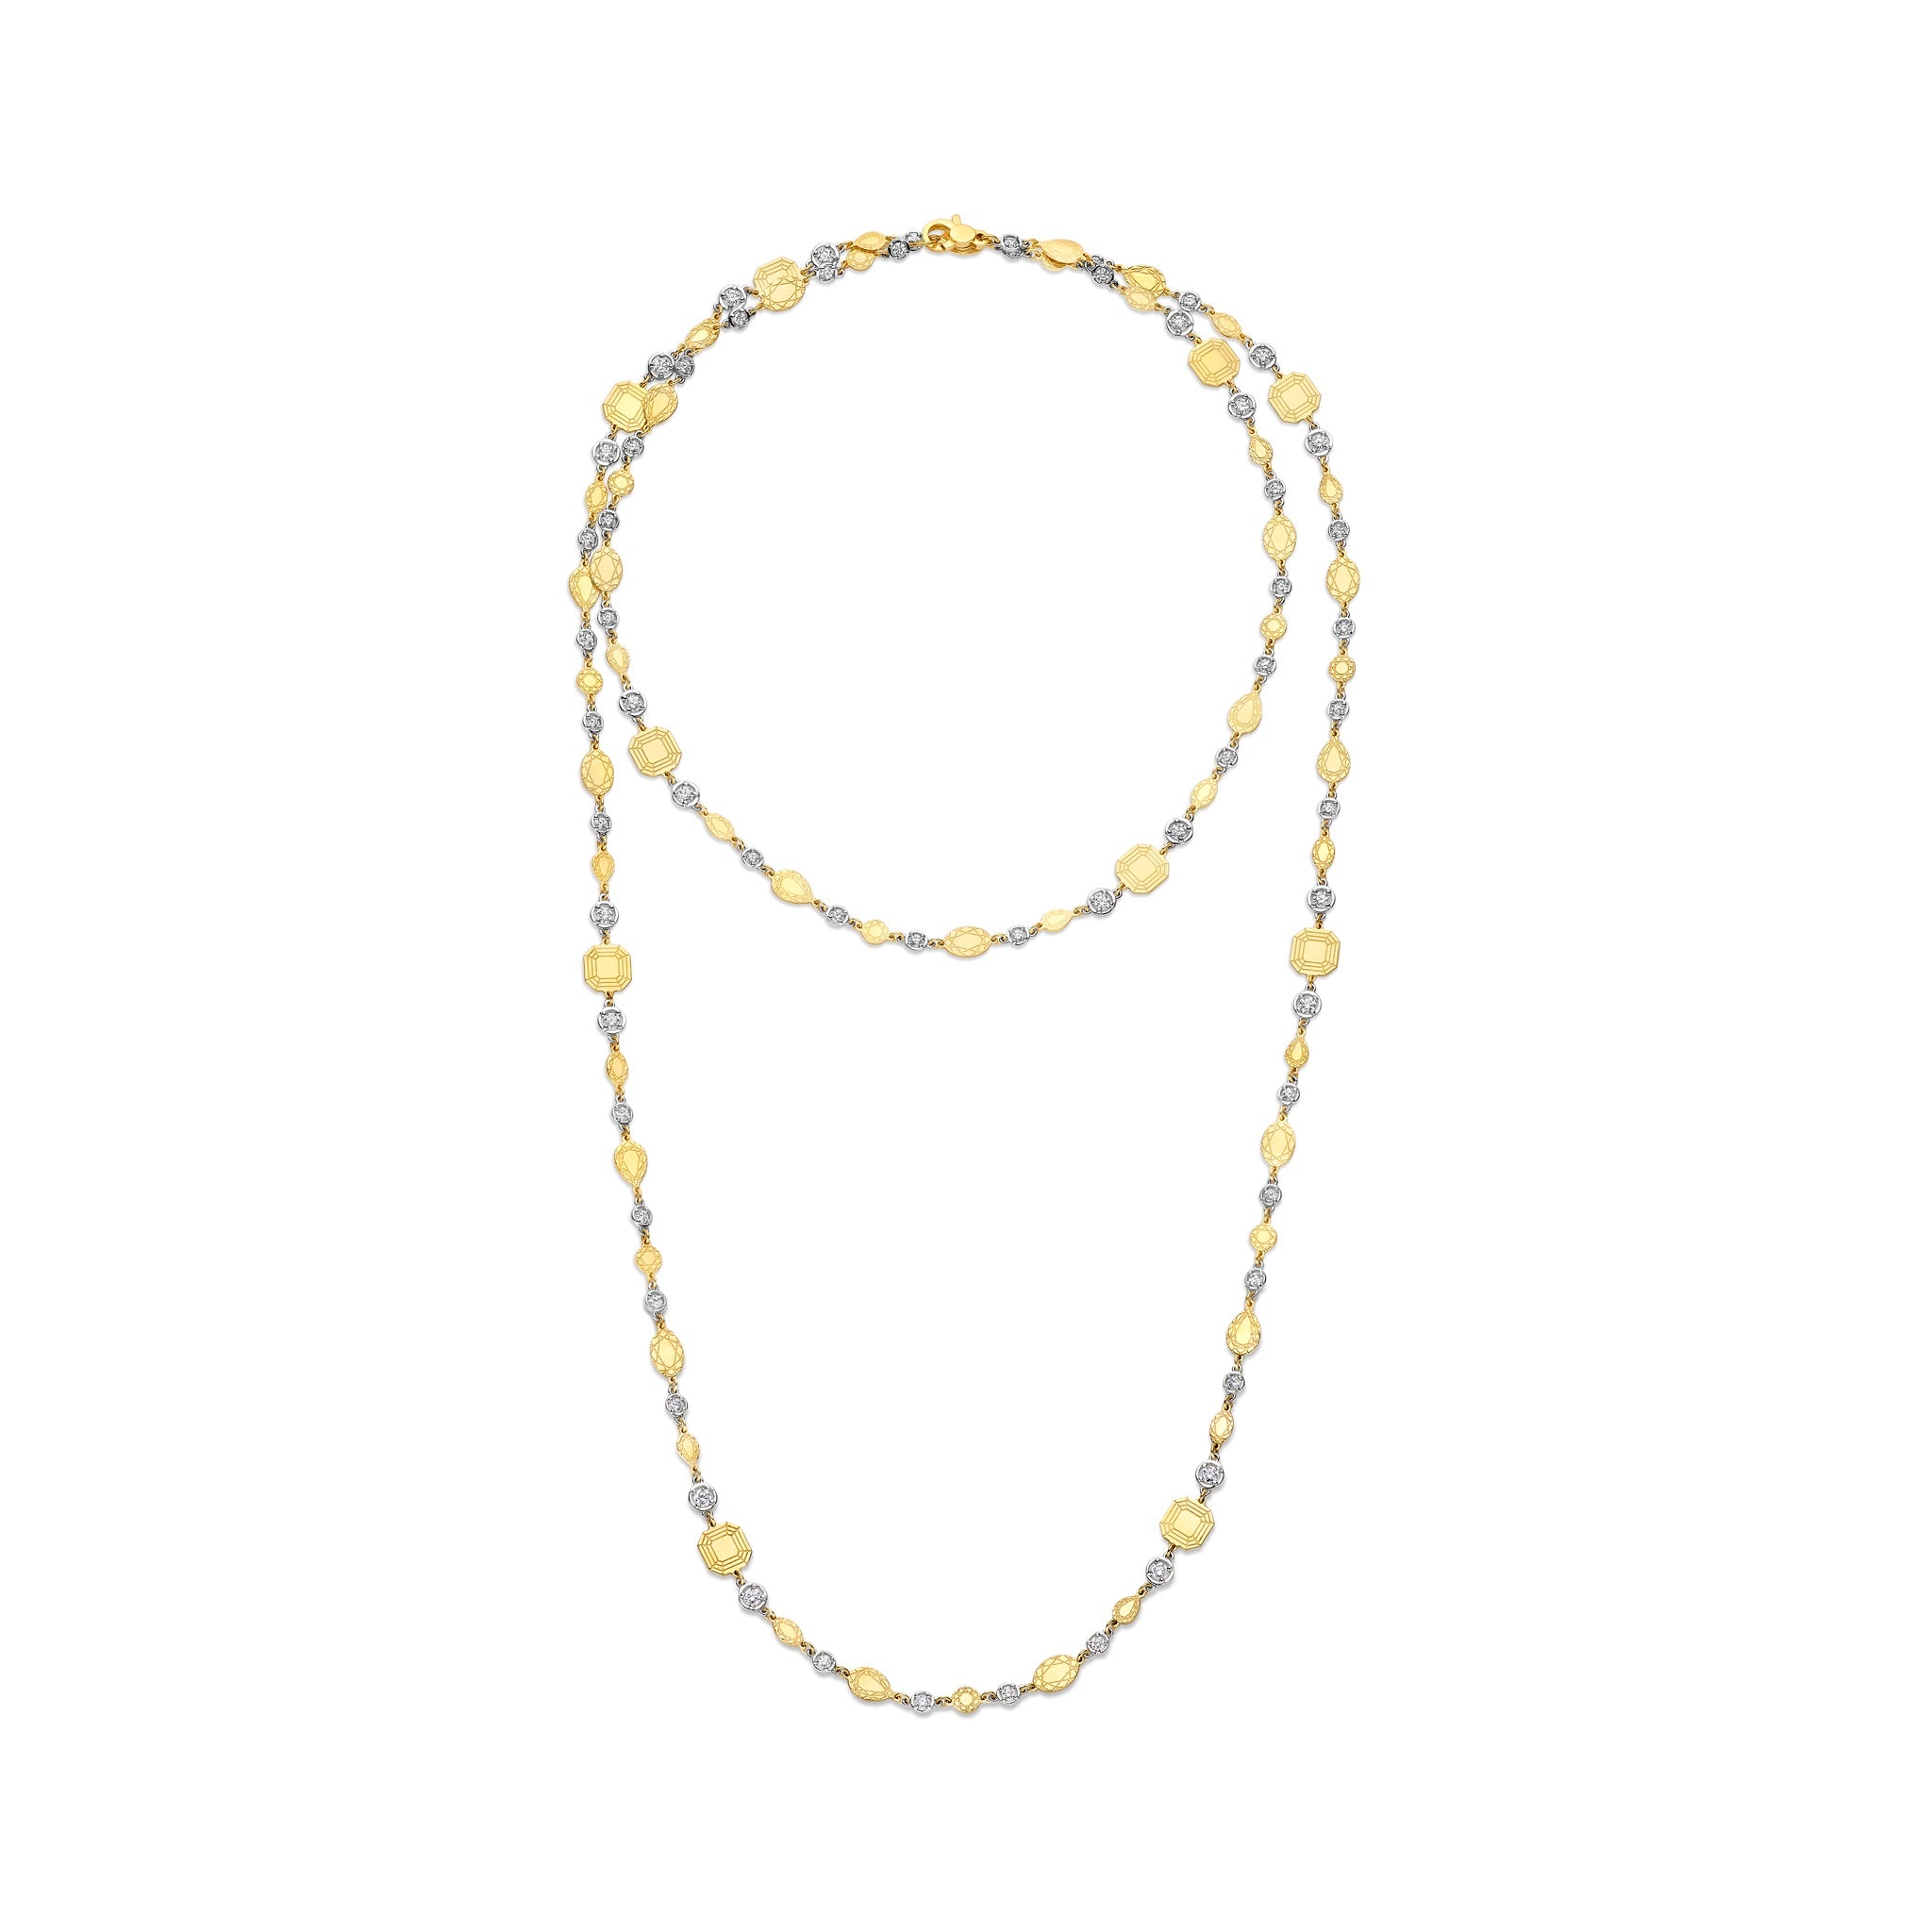 Shapes of ♥♥♥ necklace with 2.29 total diamond weight